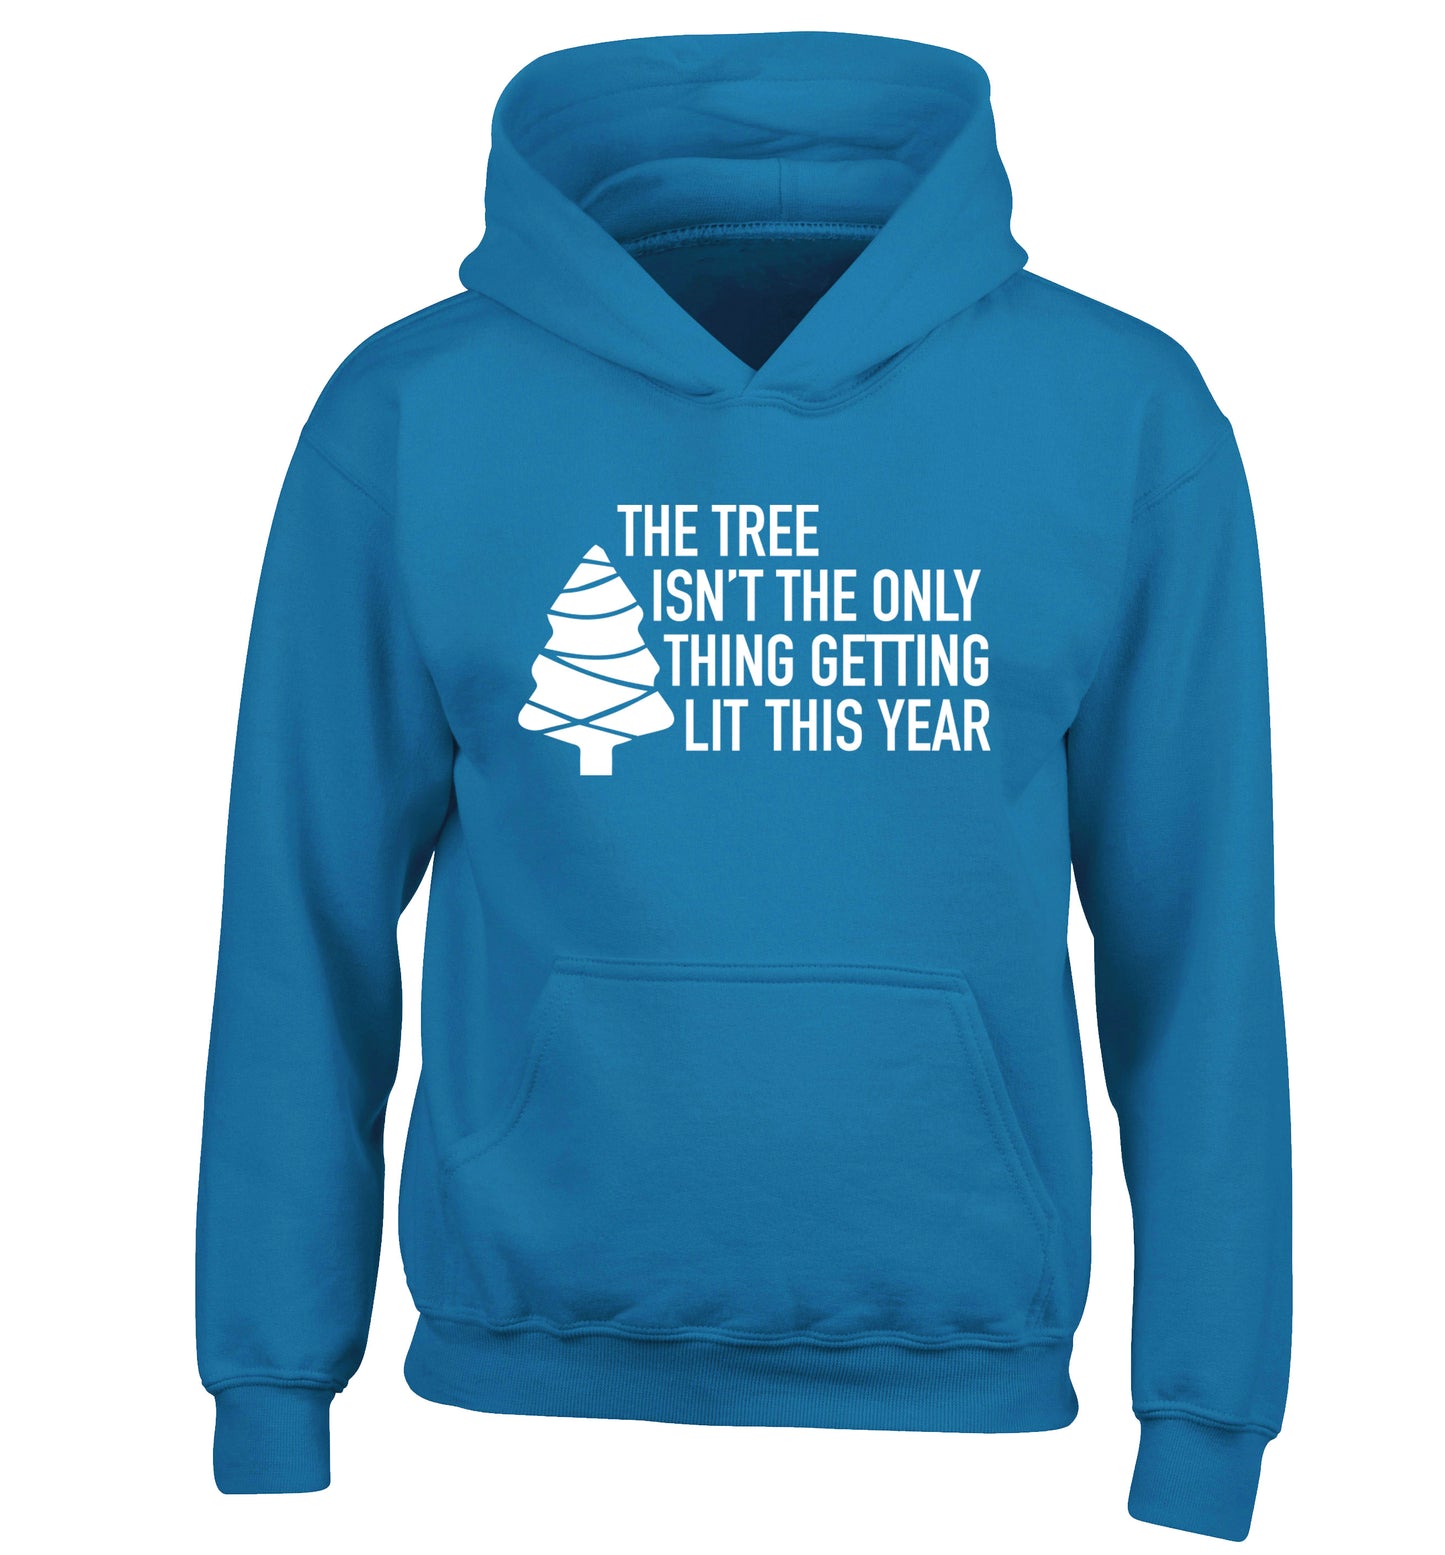 The tree isn't the only thing getting lit this year children's blue hoodie 12-14 Years